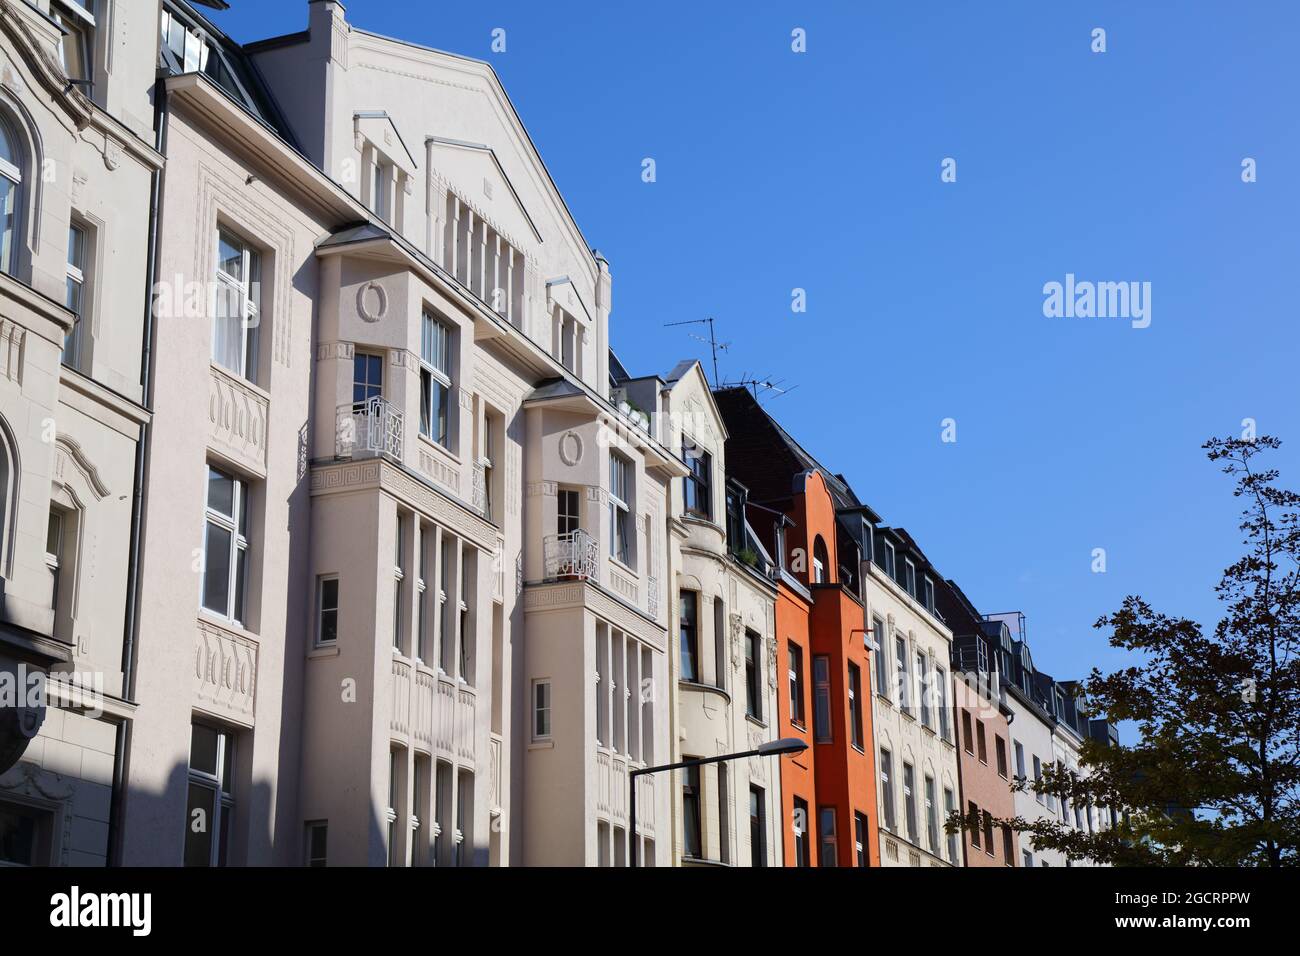 Cologne city, Germany. Old residential street view in Cologne. Stock Photo